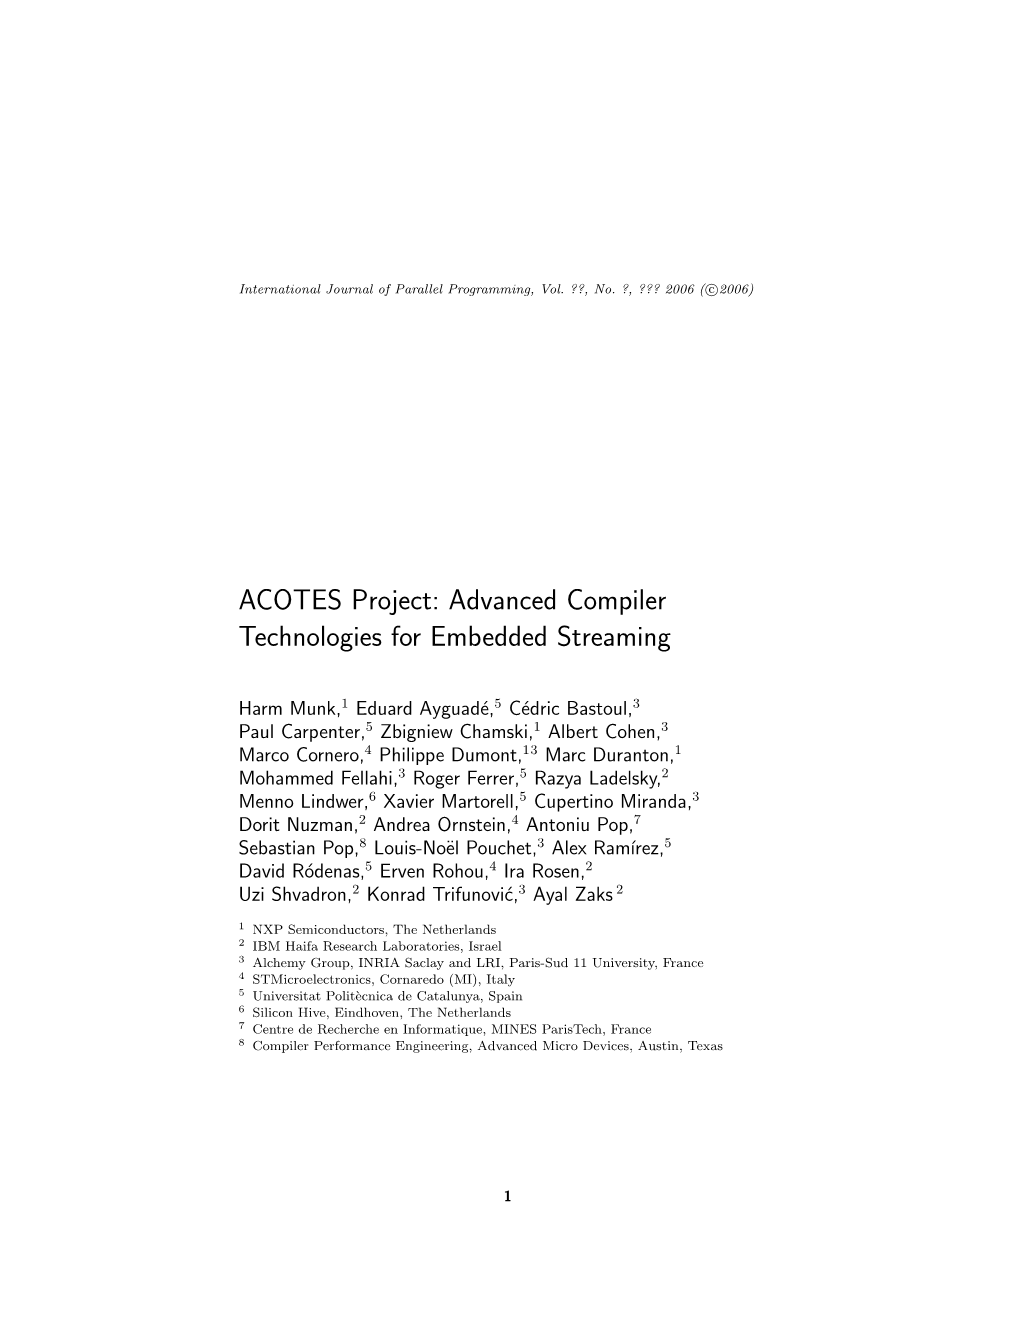 Advanced Compiler Technologies for Embedded Streaming